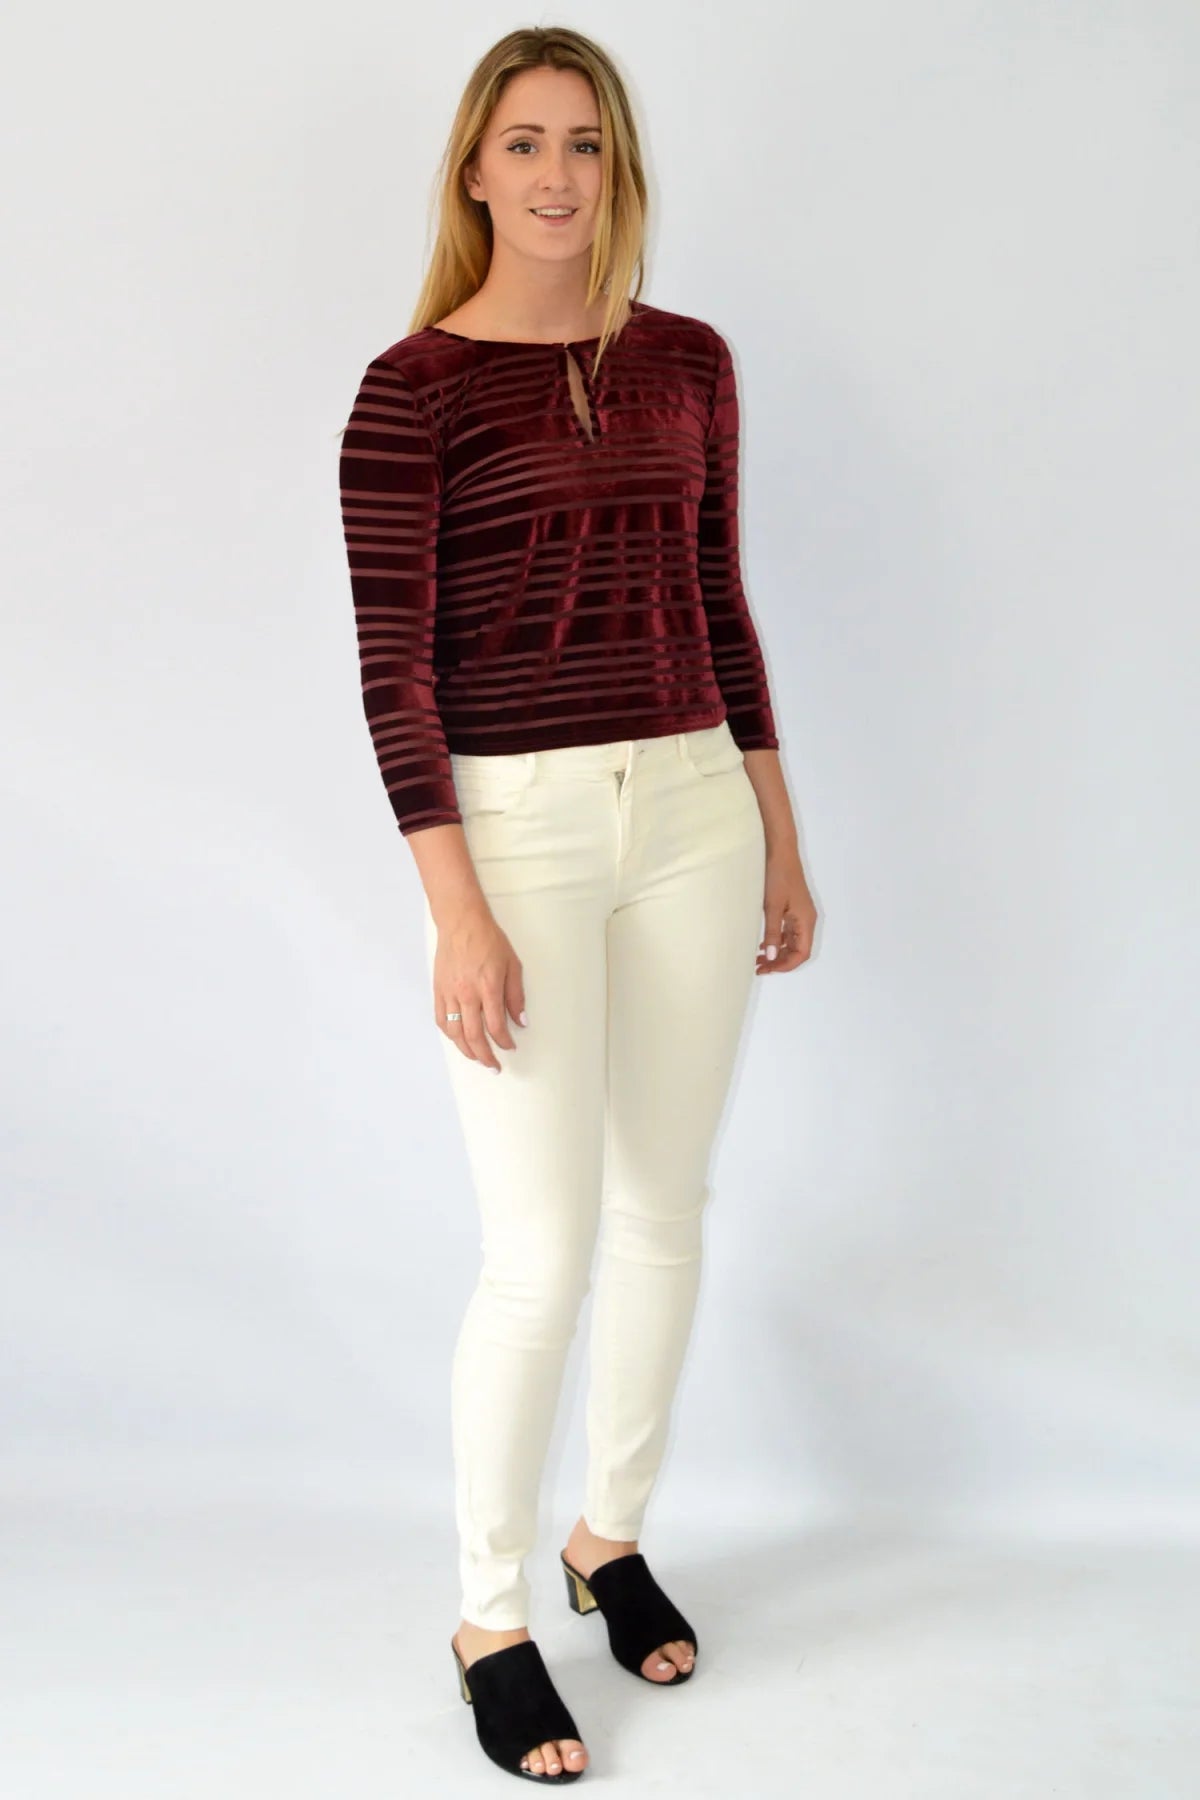 Urban Outfitters Burnout Stripe Velour Top